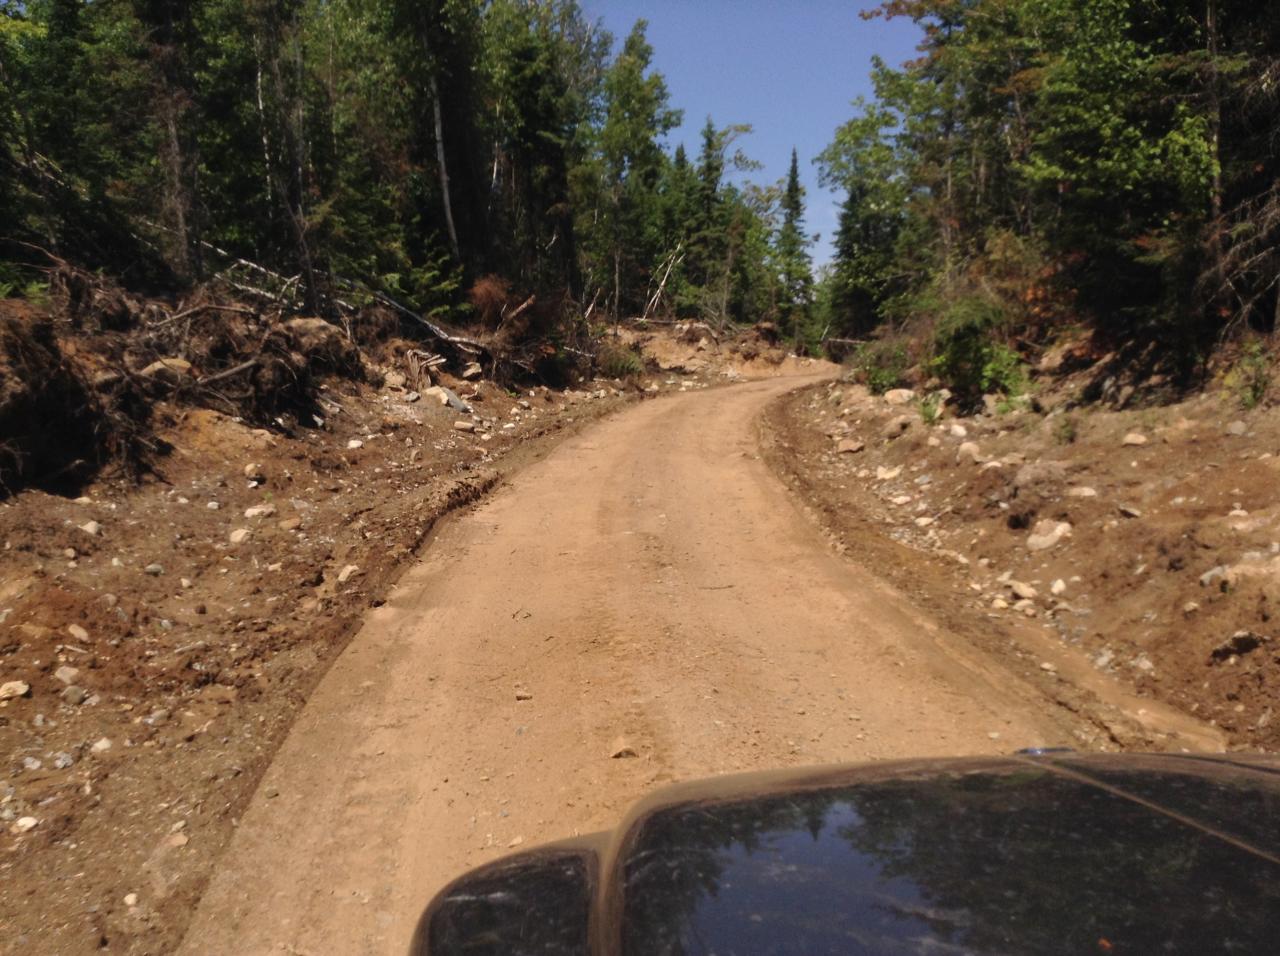 Marquette County Trail #5, 2014, after road work by Plum Creek (to "upgrade snowmobile bridge")